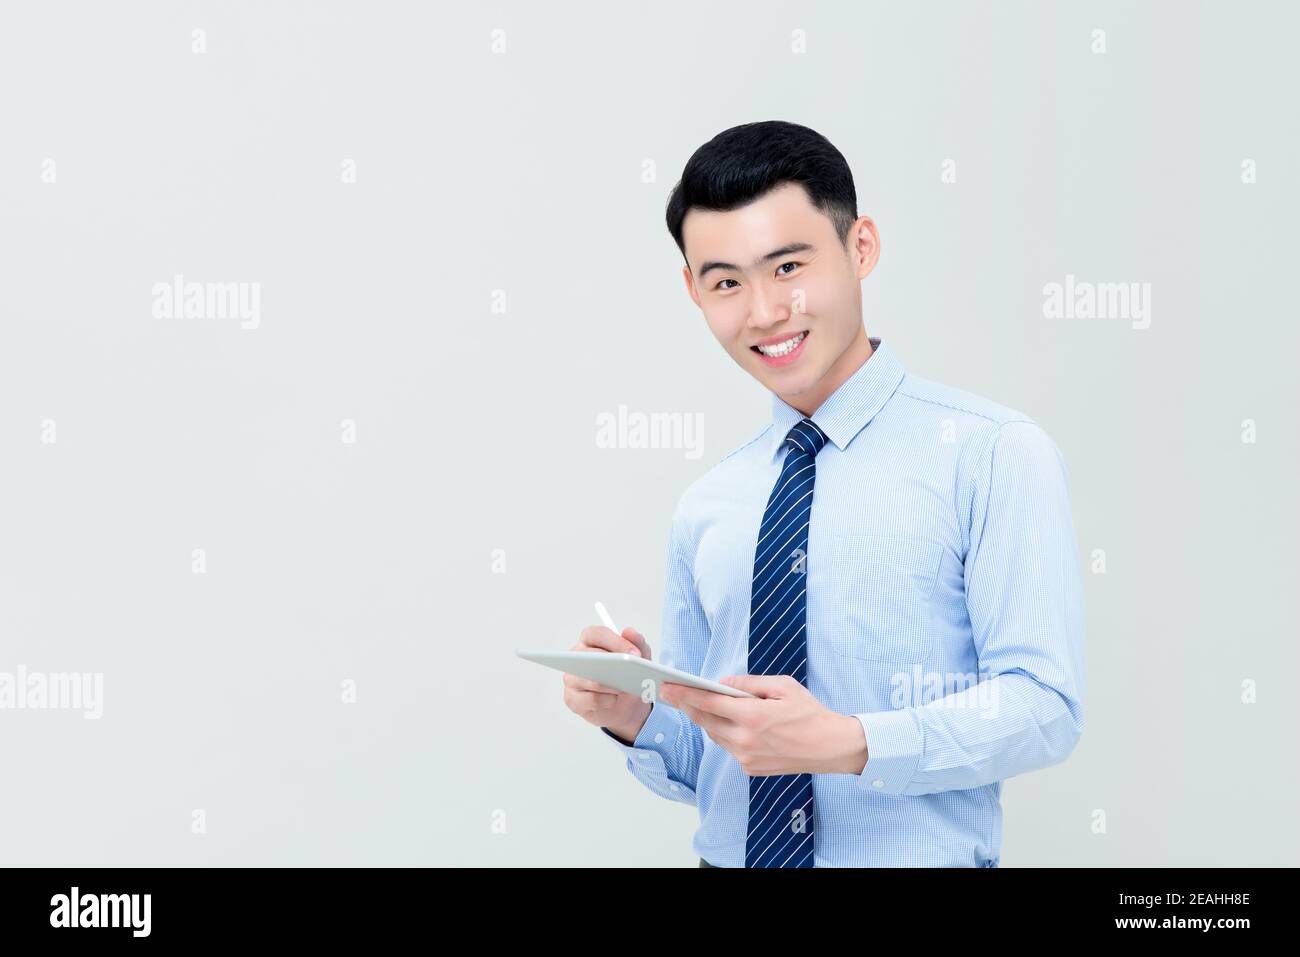 Young smiling Asian businessman using digital tablet with stylus pen isolated on gray background Stock Photo